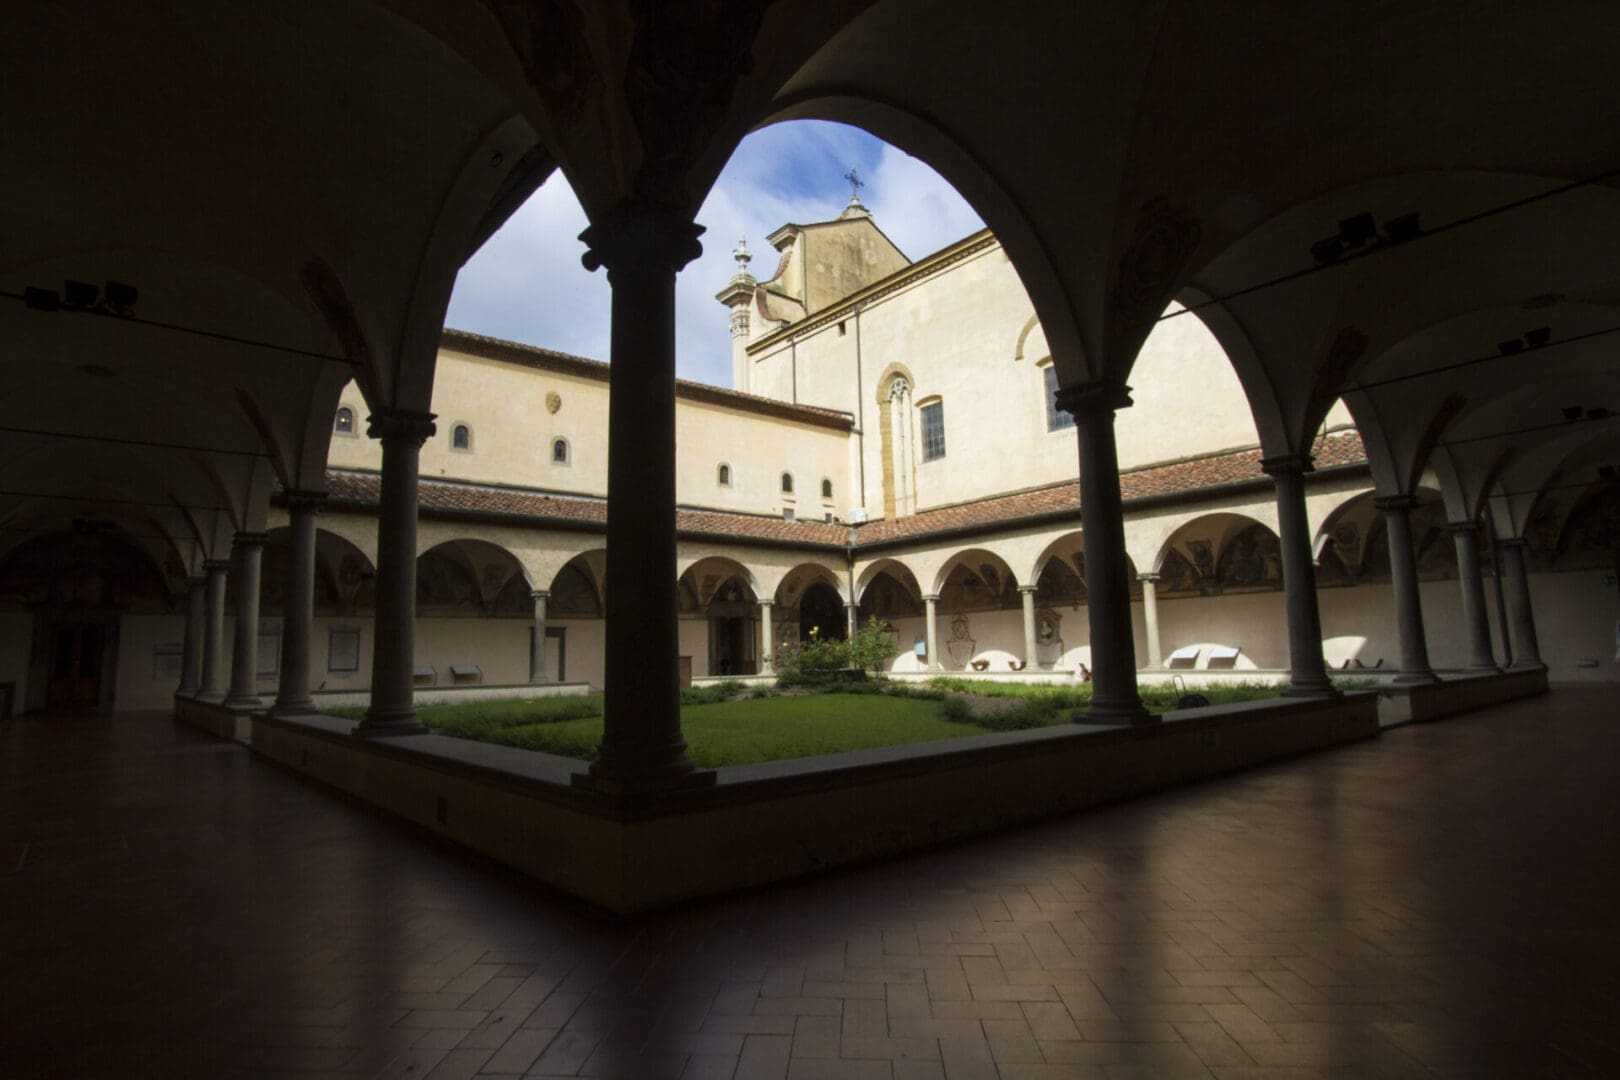 The courtyard of a large building with arches.